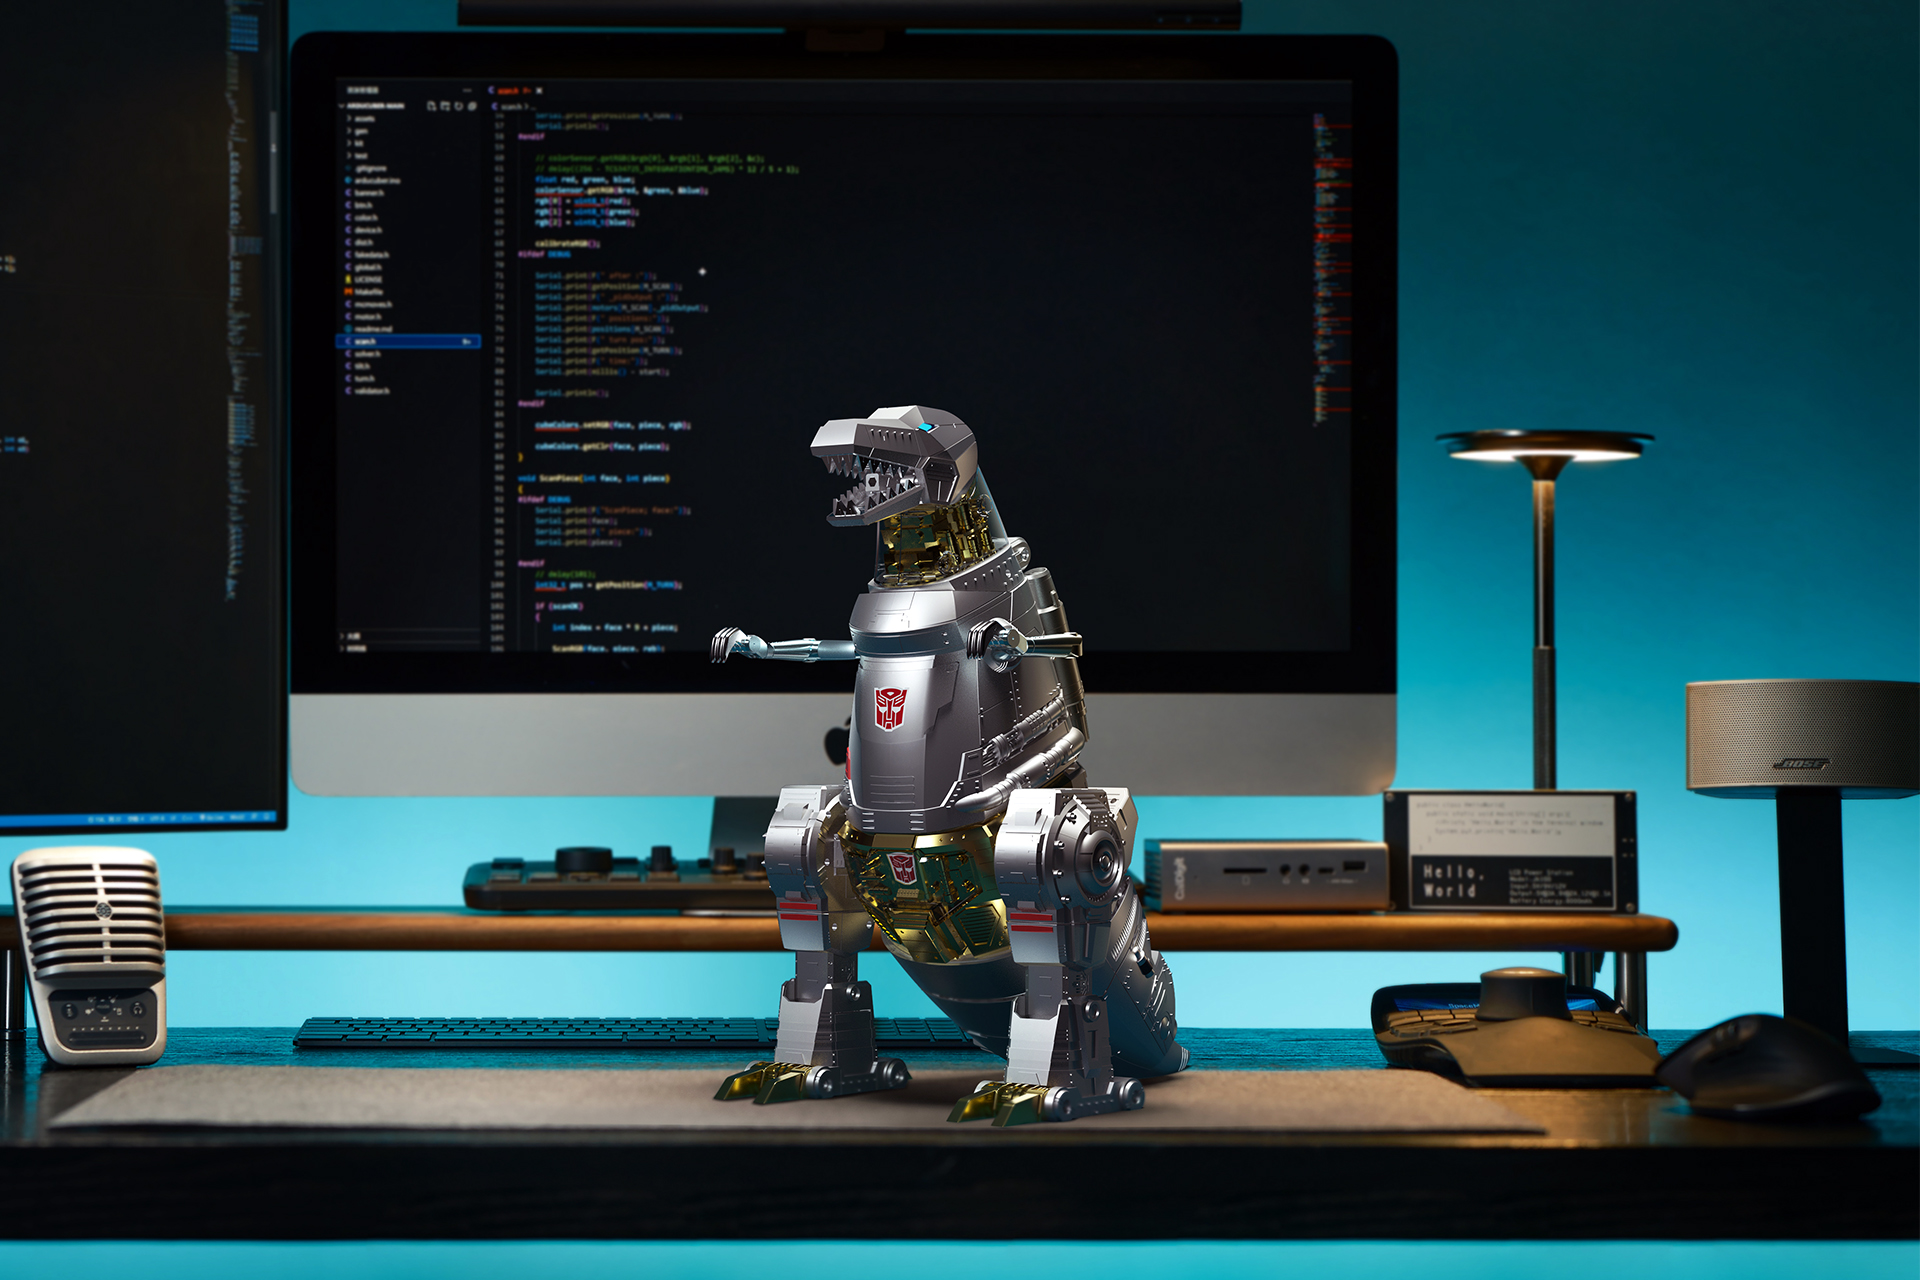 Robosen’s Grimlock Transformers toy standing on a desk with dual monitors and computer accessories